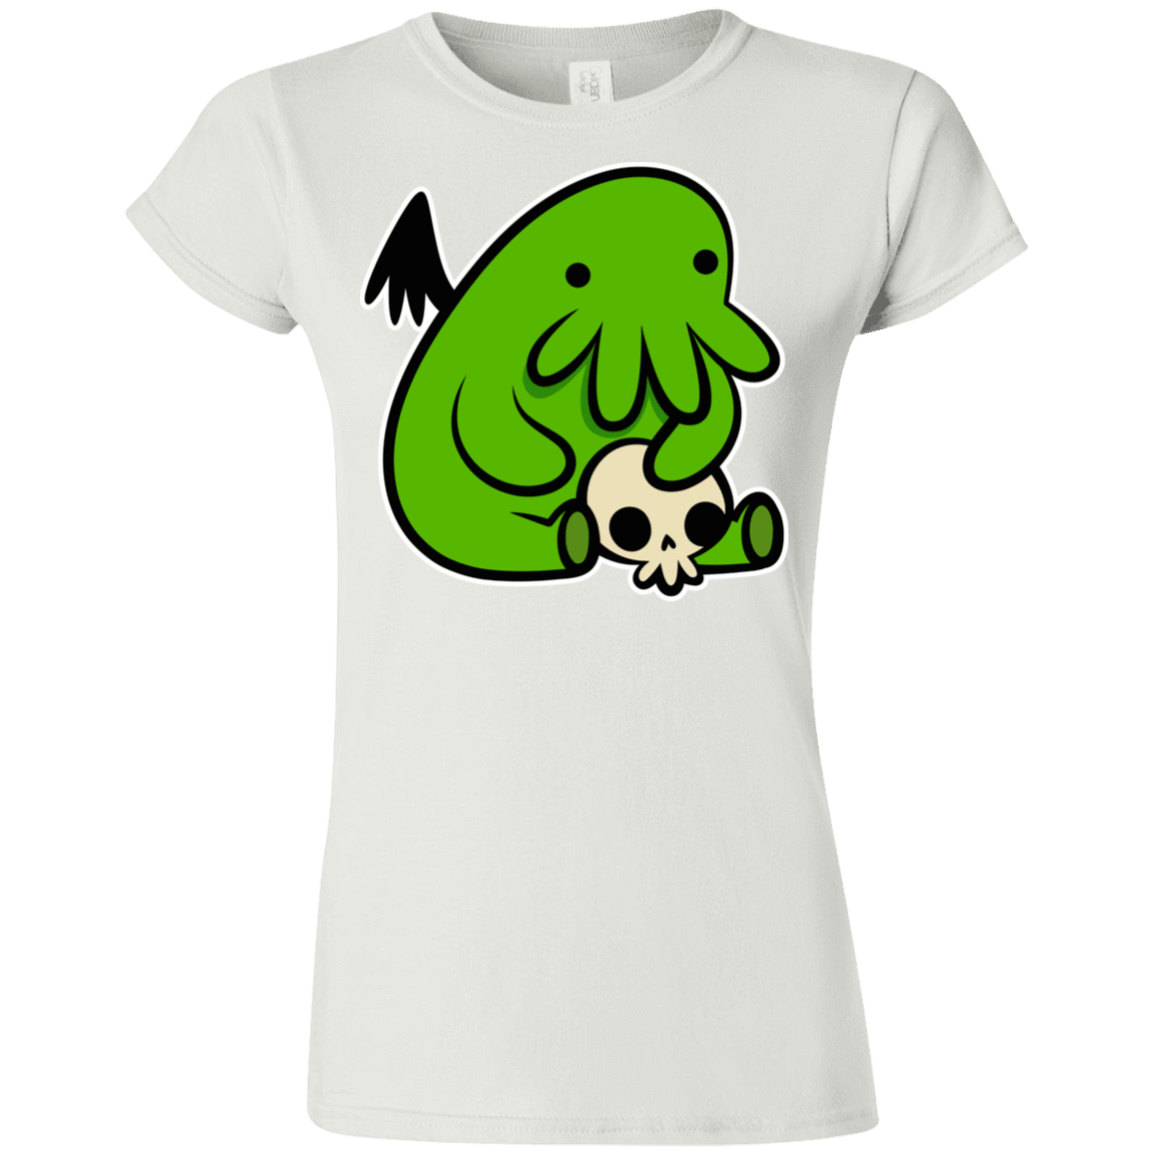 T-Shirts White / S Baby Cthulhu Junior Slimmer-Fit T-Shirt